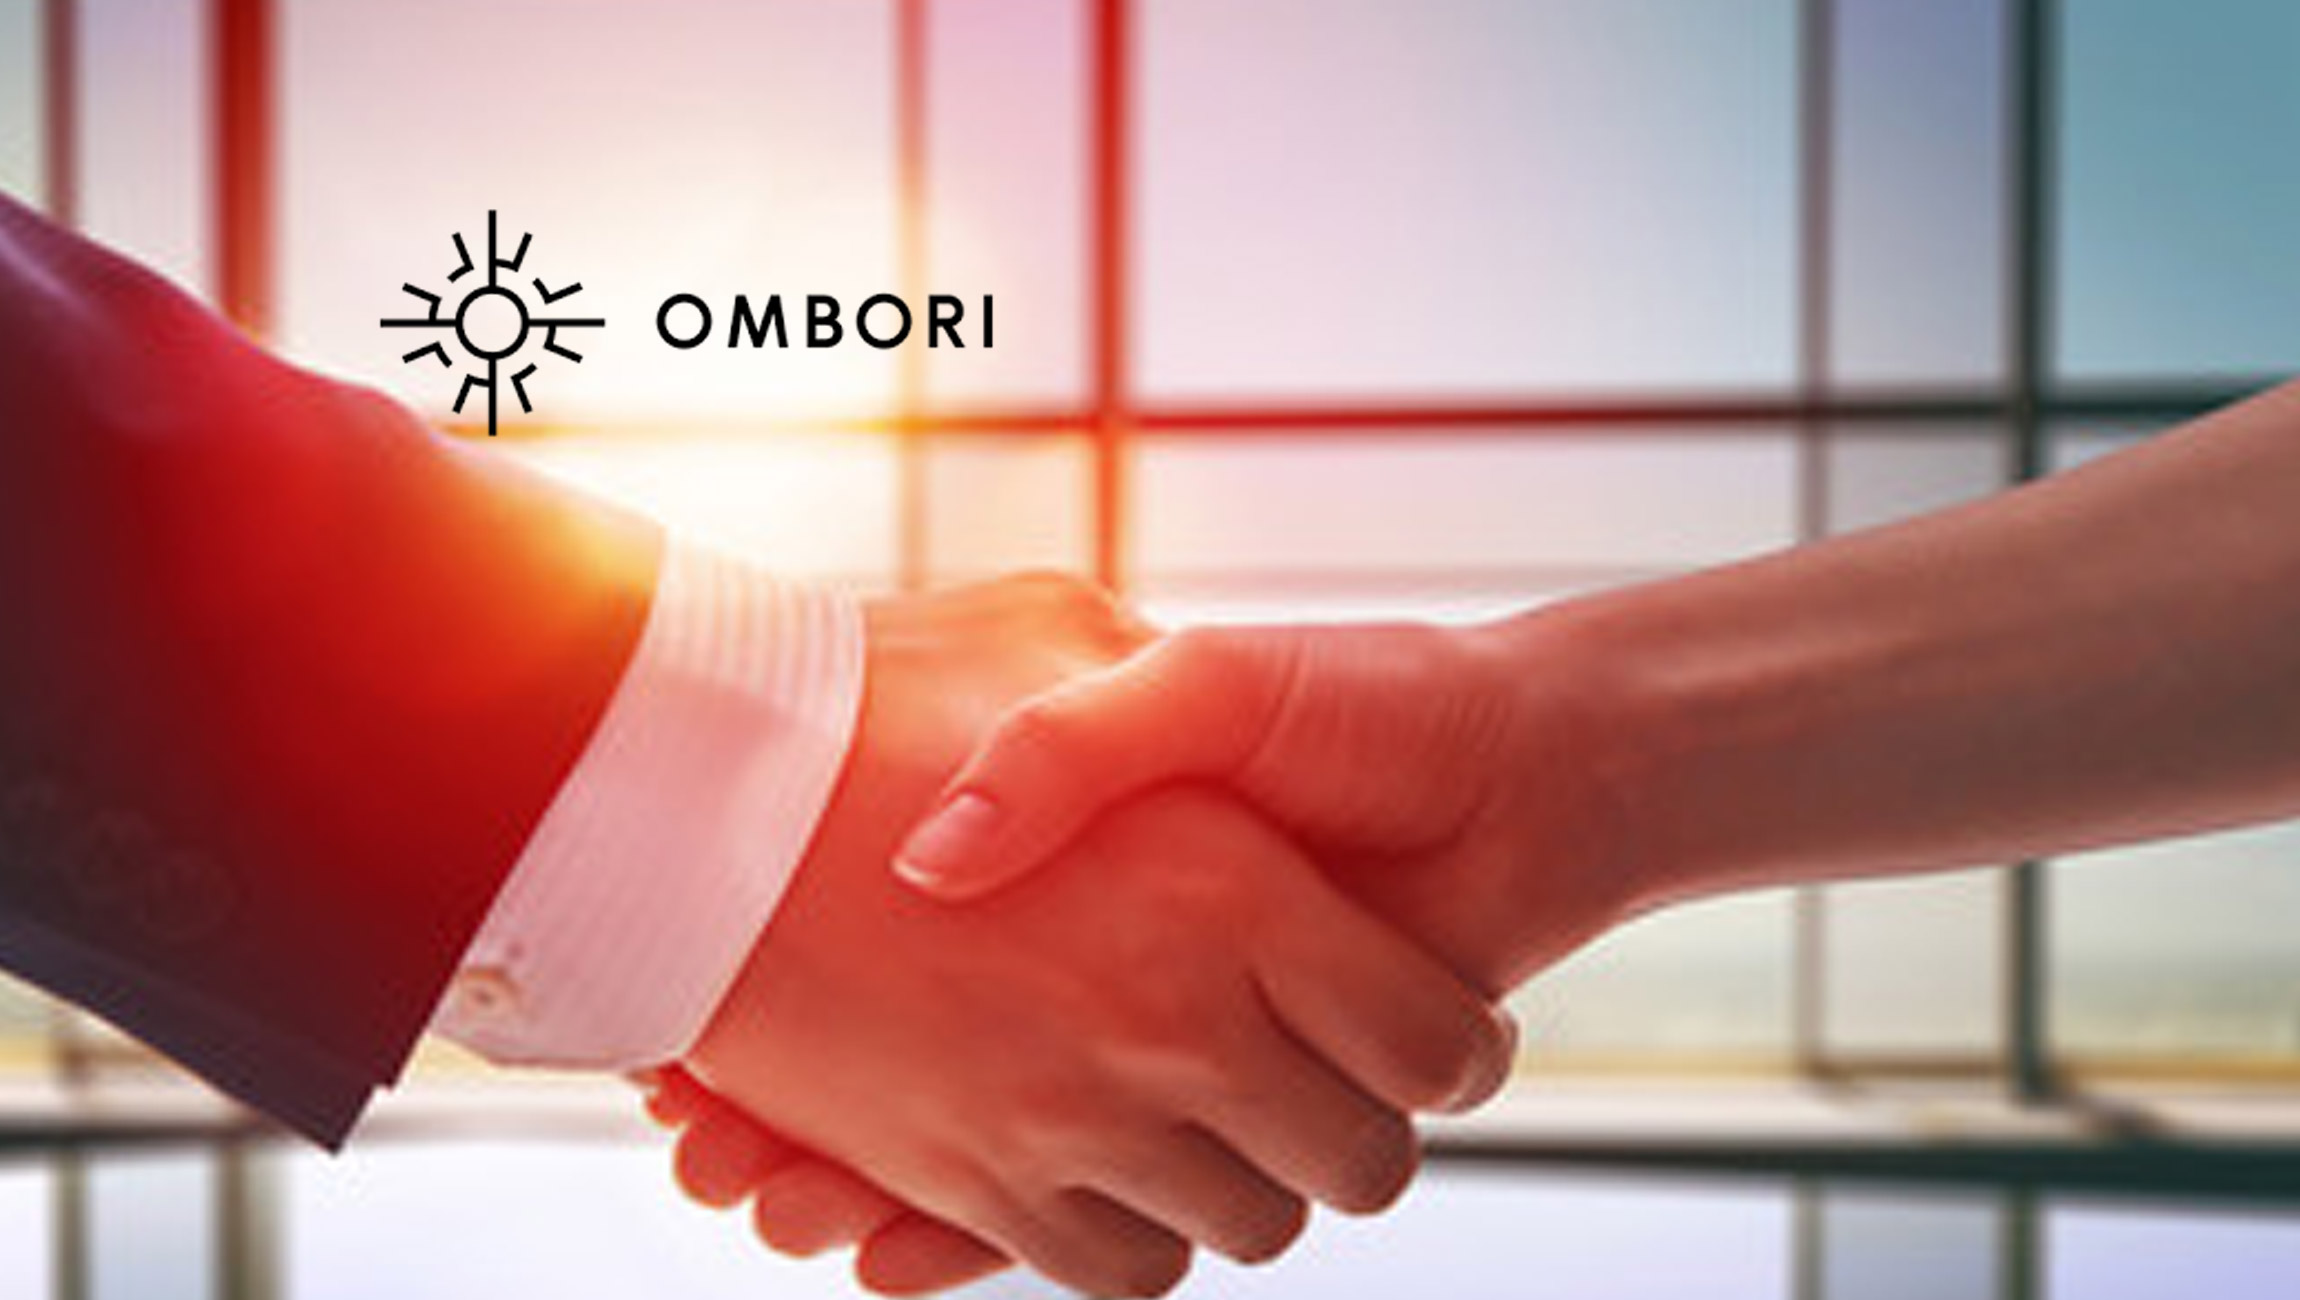 OmboriGrid Announces Strategic Partnership with Pathr.ai to Offer Spatial Intelligence to Retailers